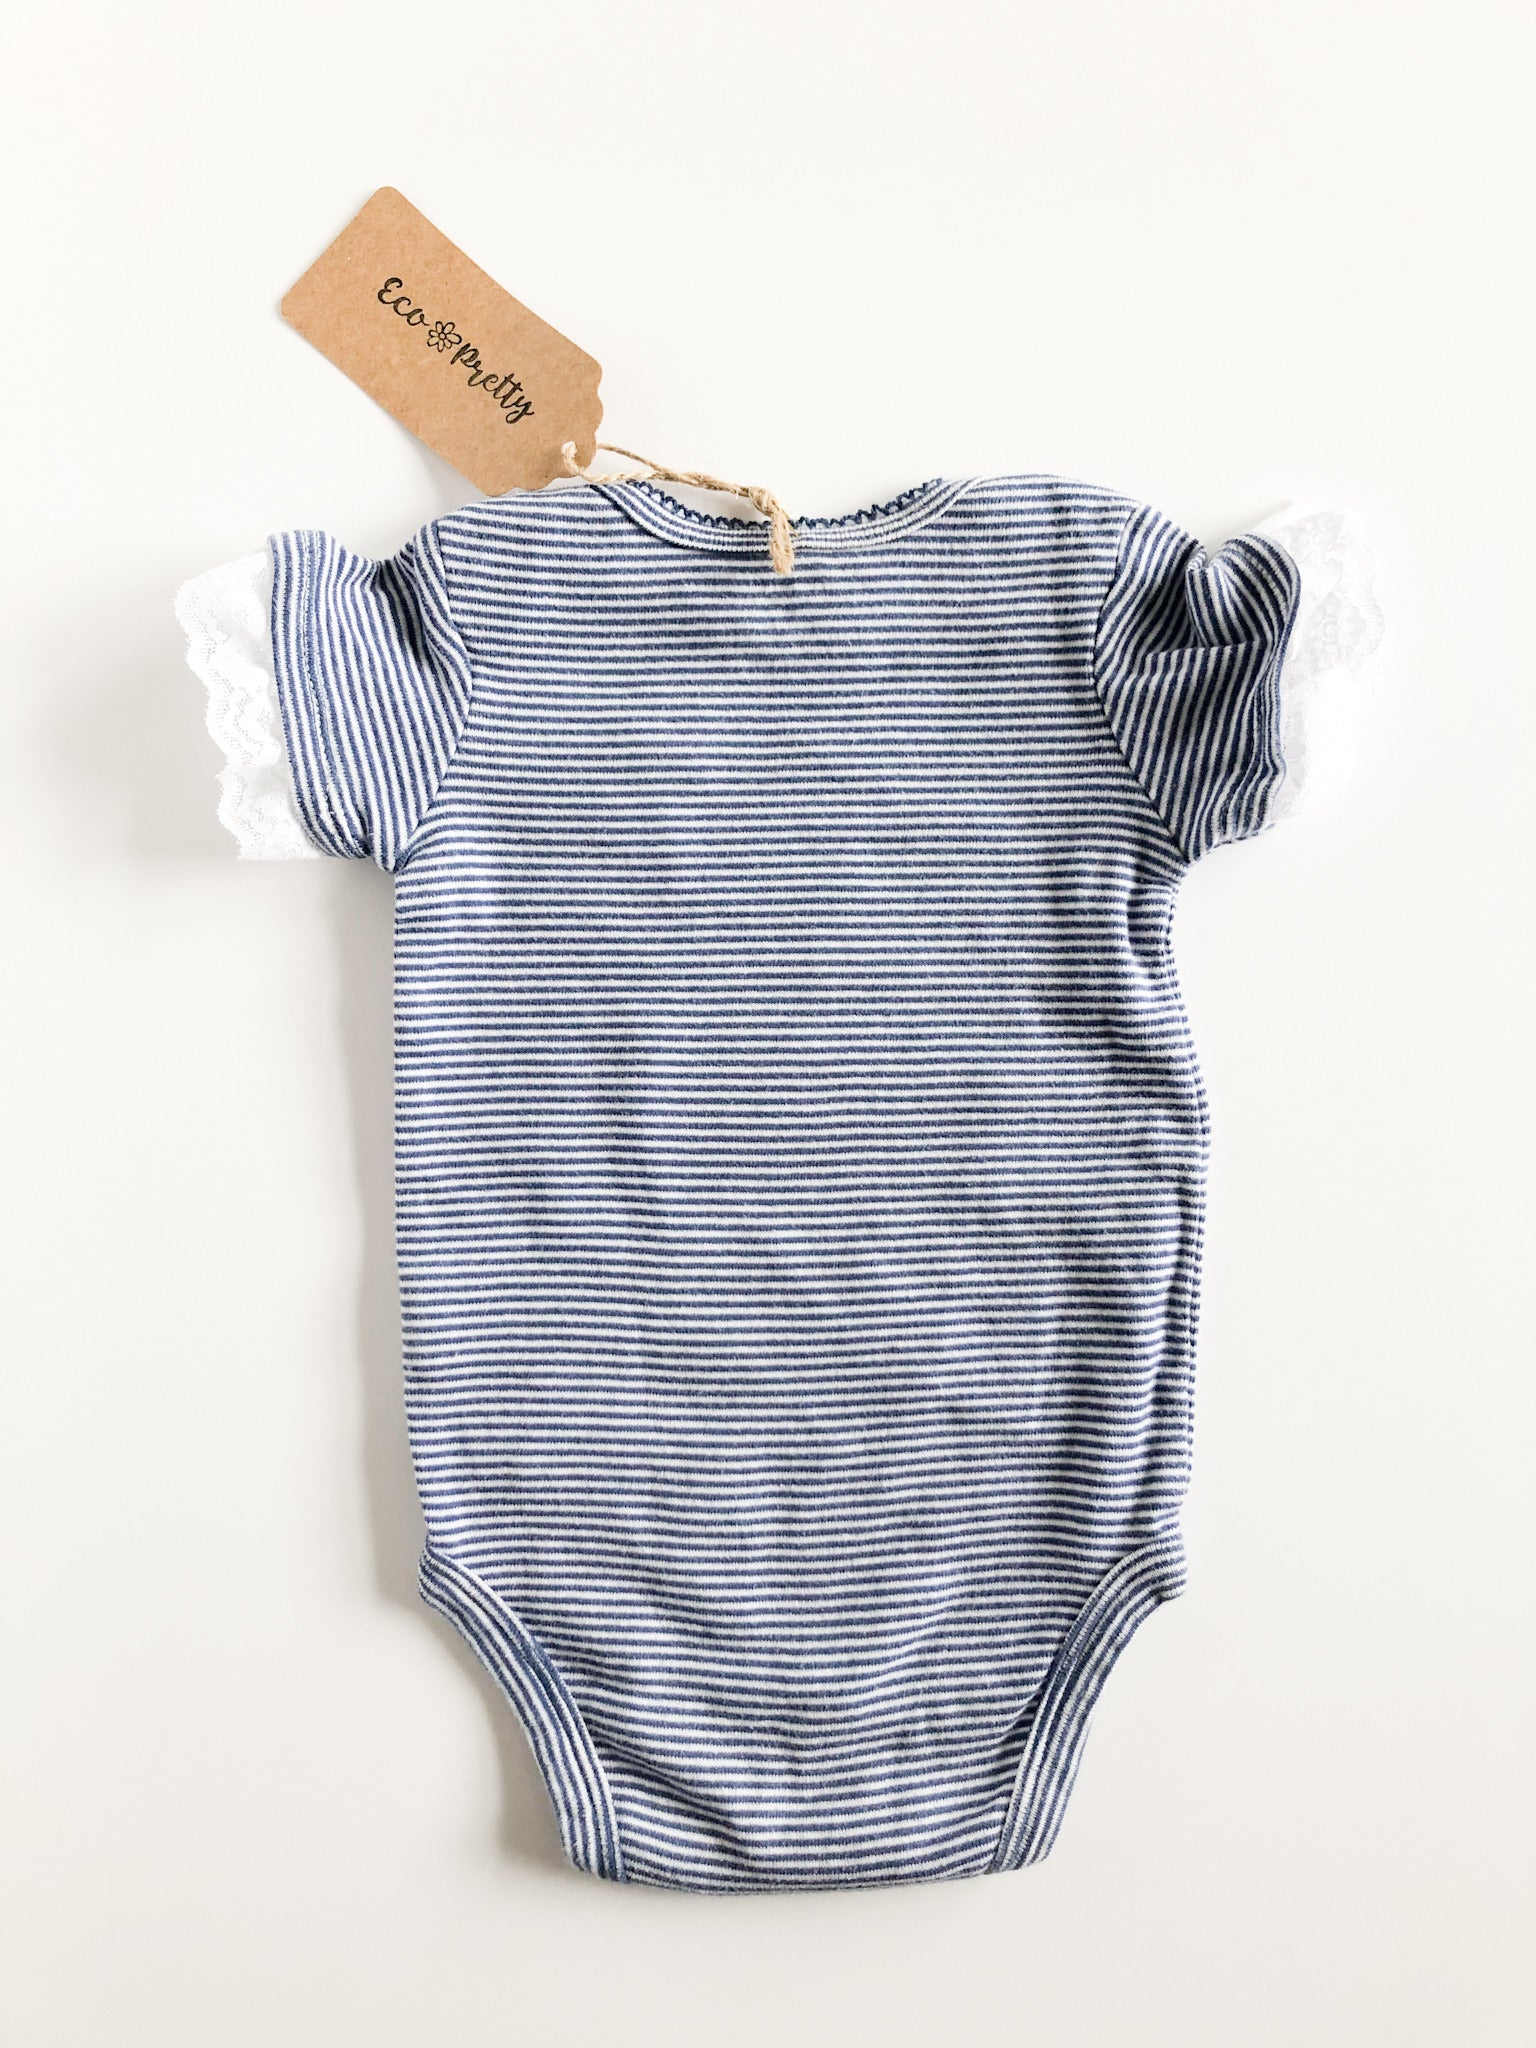 Blue Stripe Lace Under the Sea Upcycled Bodysuit by Eco Pretty - 6 Months - Le Prix Fashion & Consulting